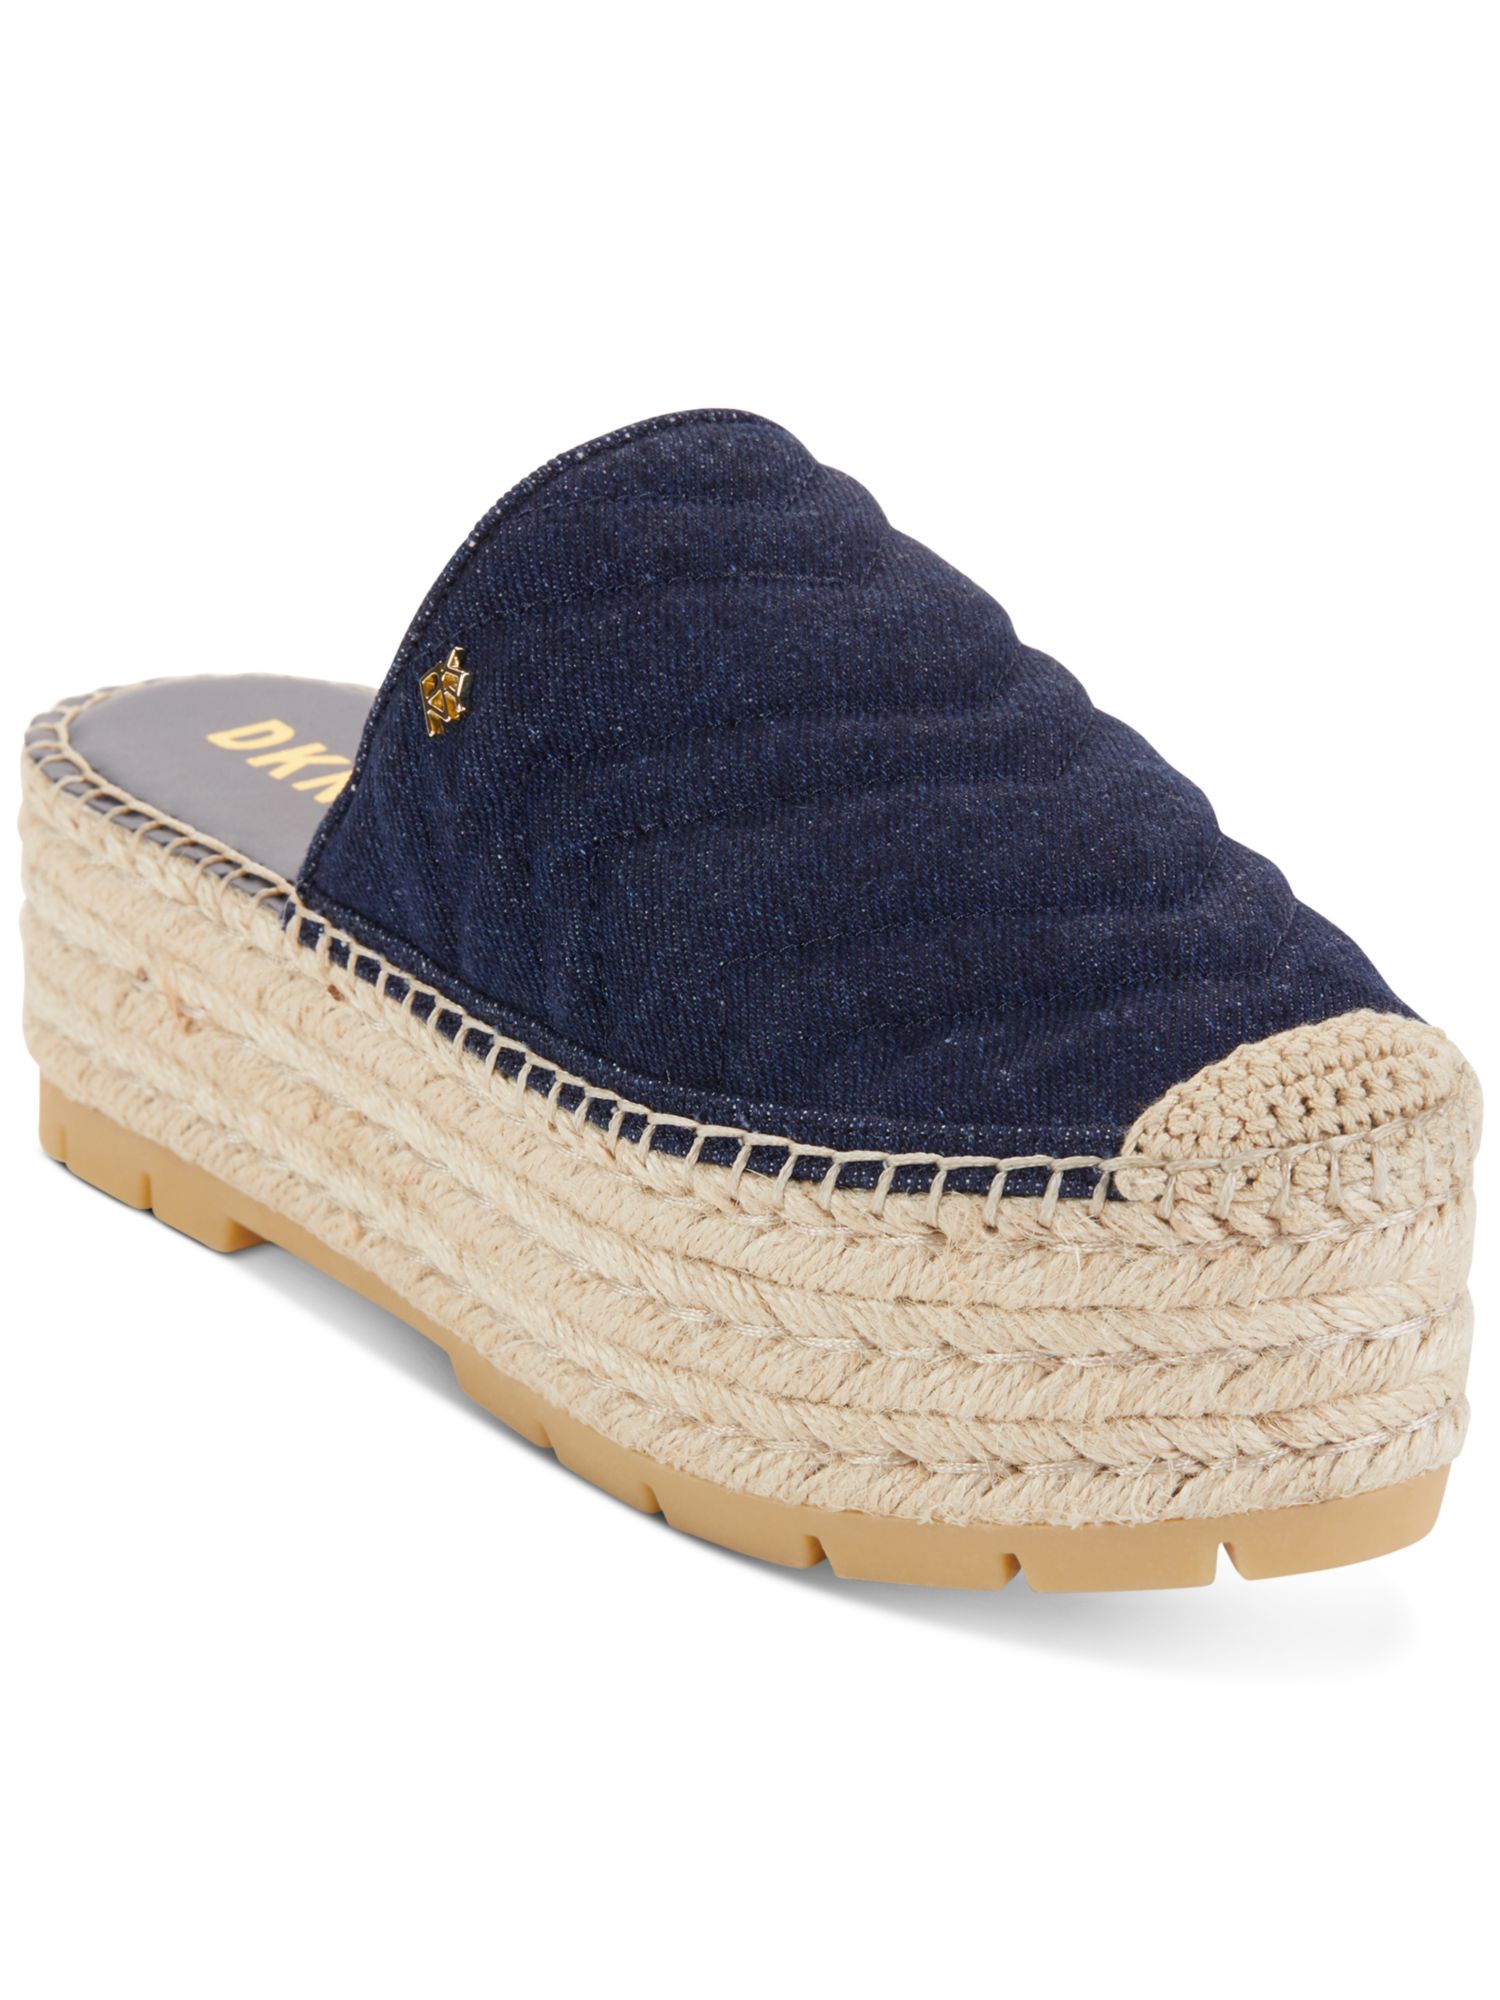 DKNY Womens Blue Quilted Jute Wrapped Cushioned Logo Ricki Round Toe Platform Slip On Mules 5.5